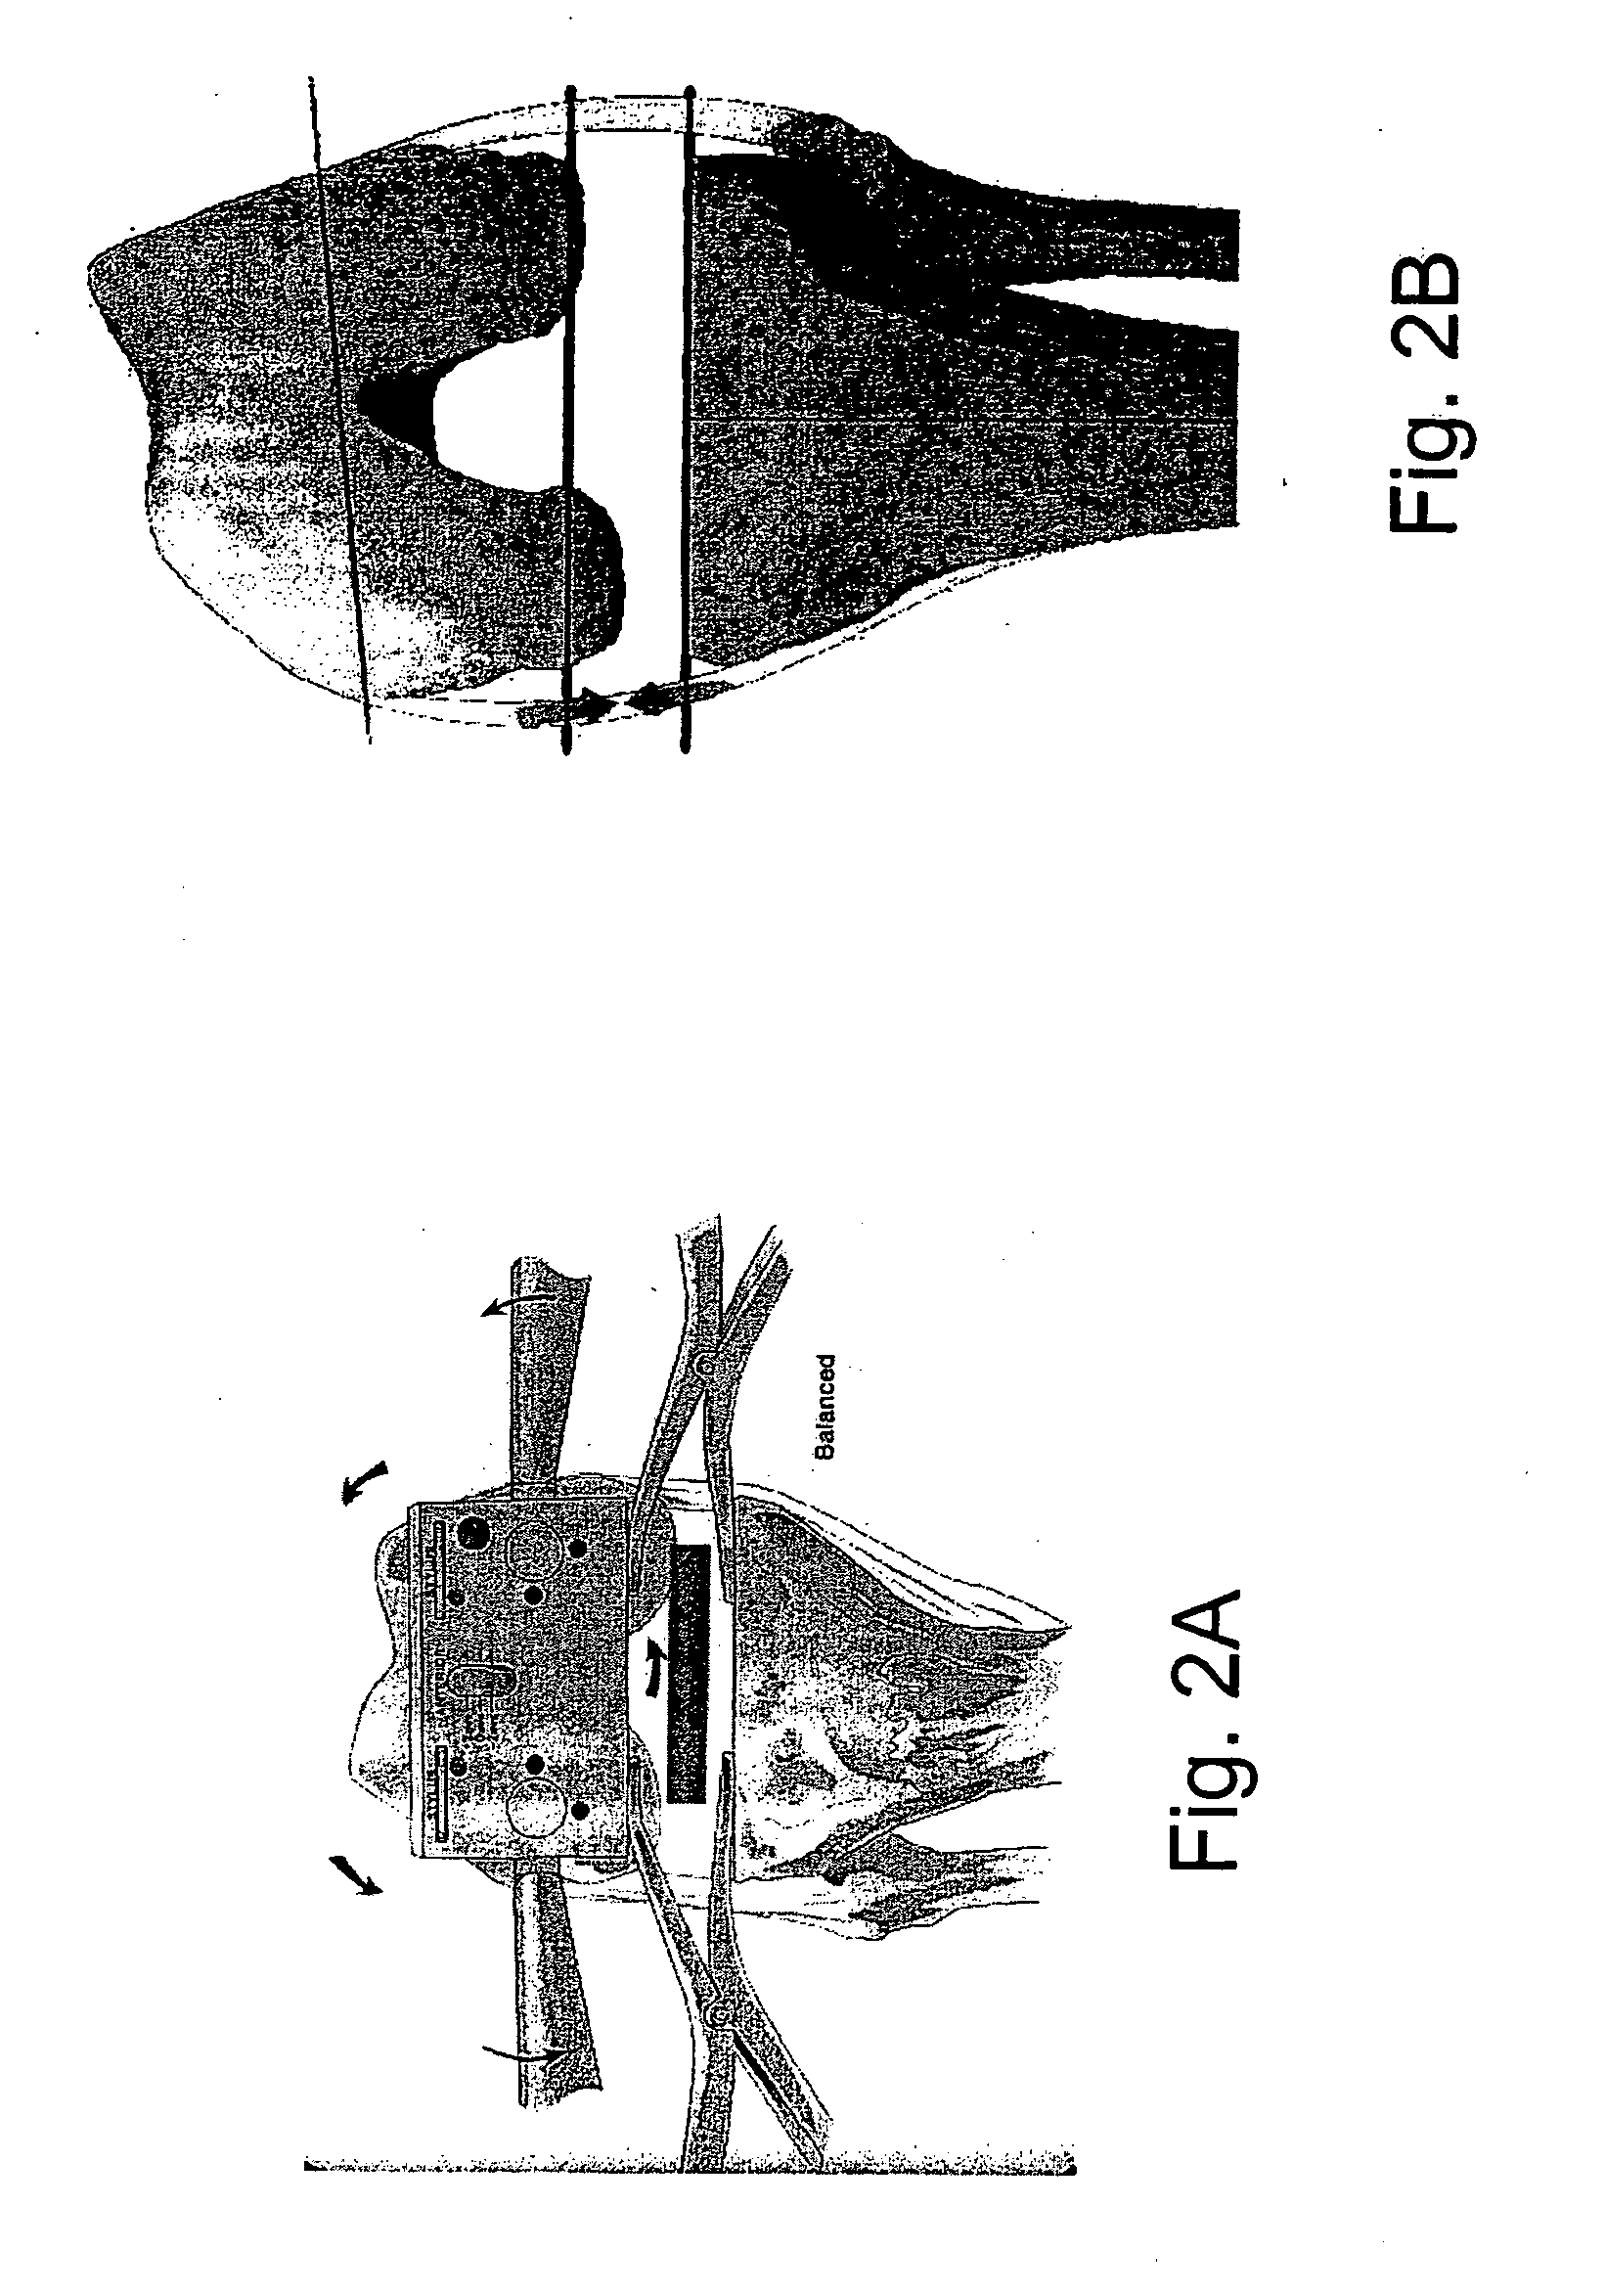 Methods and systems for intraoperative measurement of soft tissue constraints in computer aided total joint replacement surgery